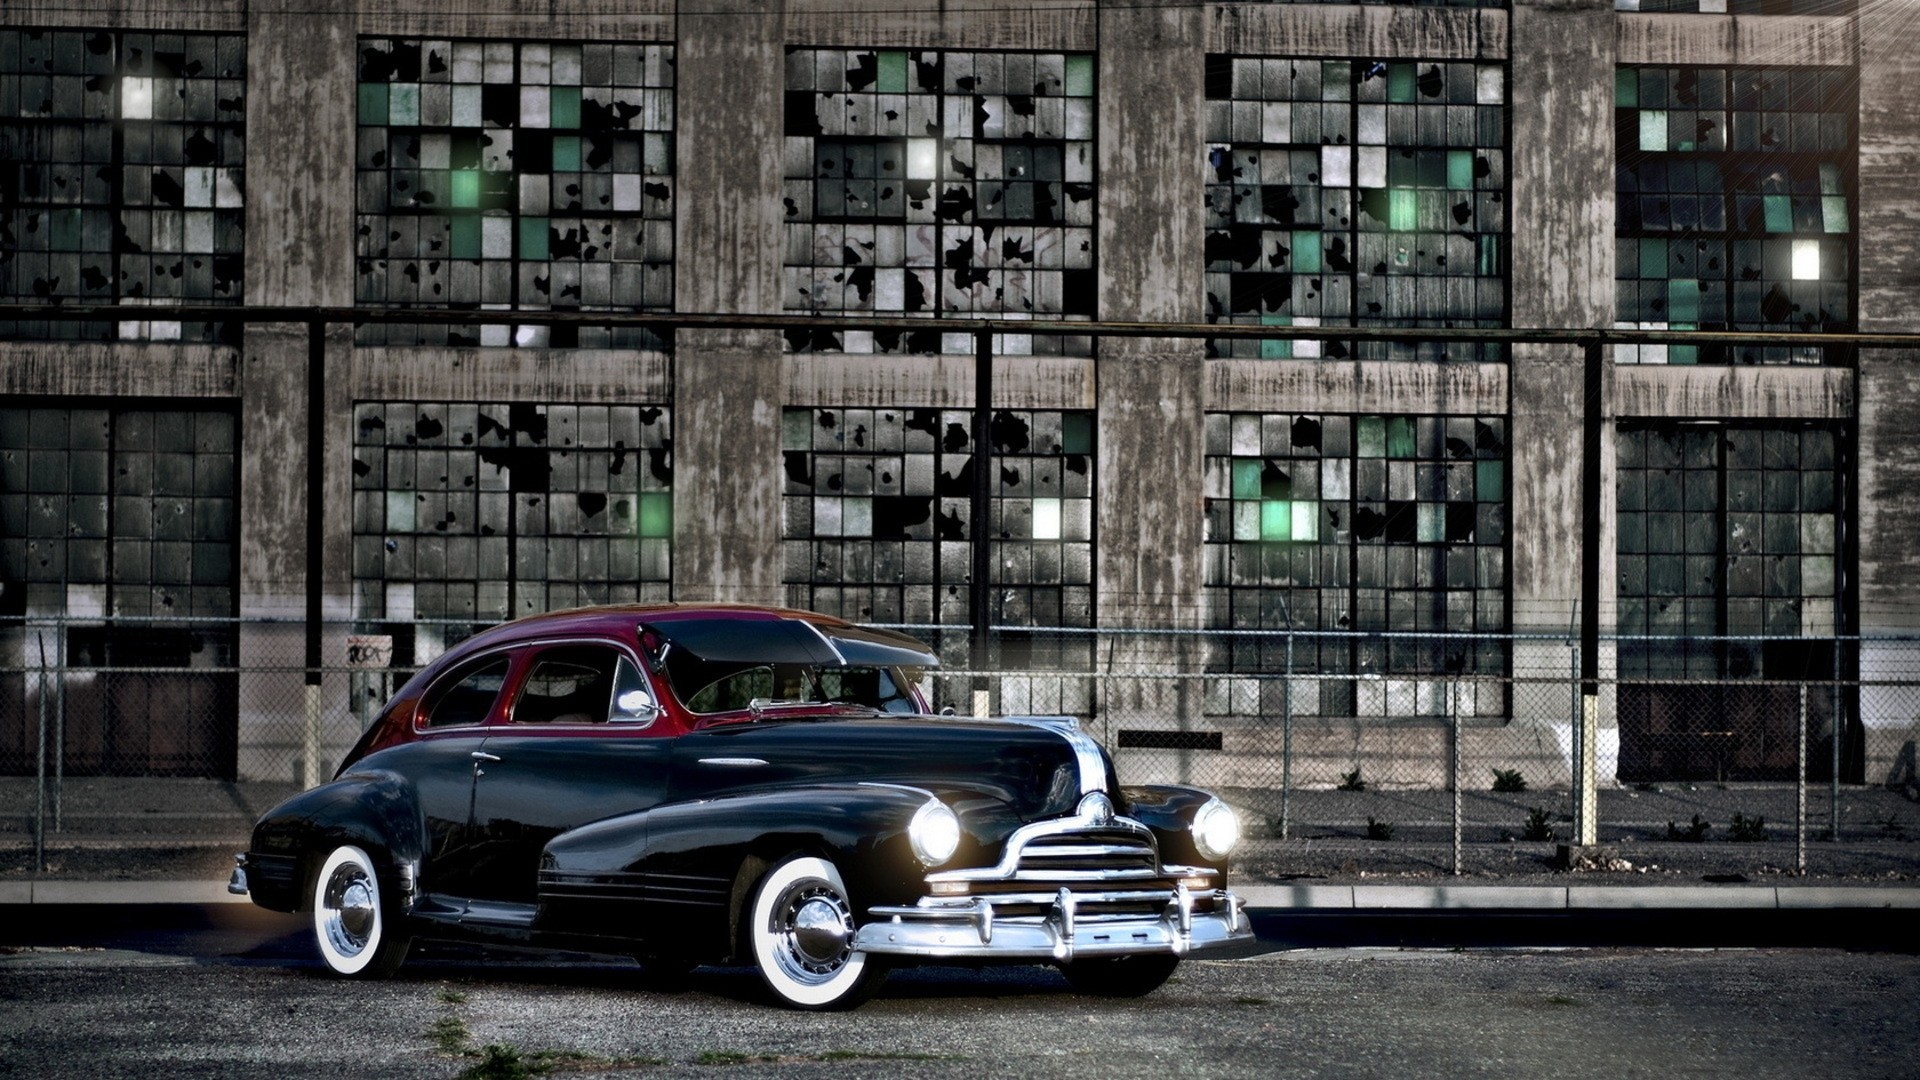 Wallpaper Vintage Chevrolet At An Abandoned Warehouse Fence Car